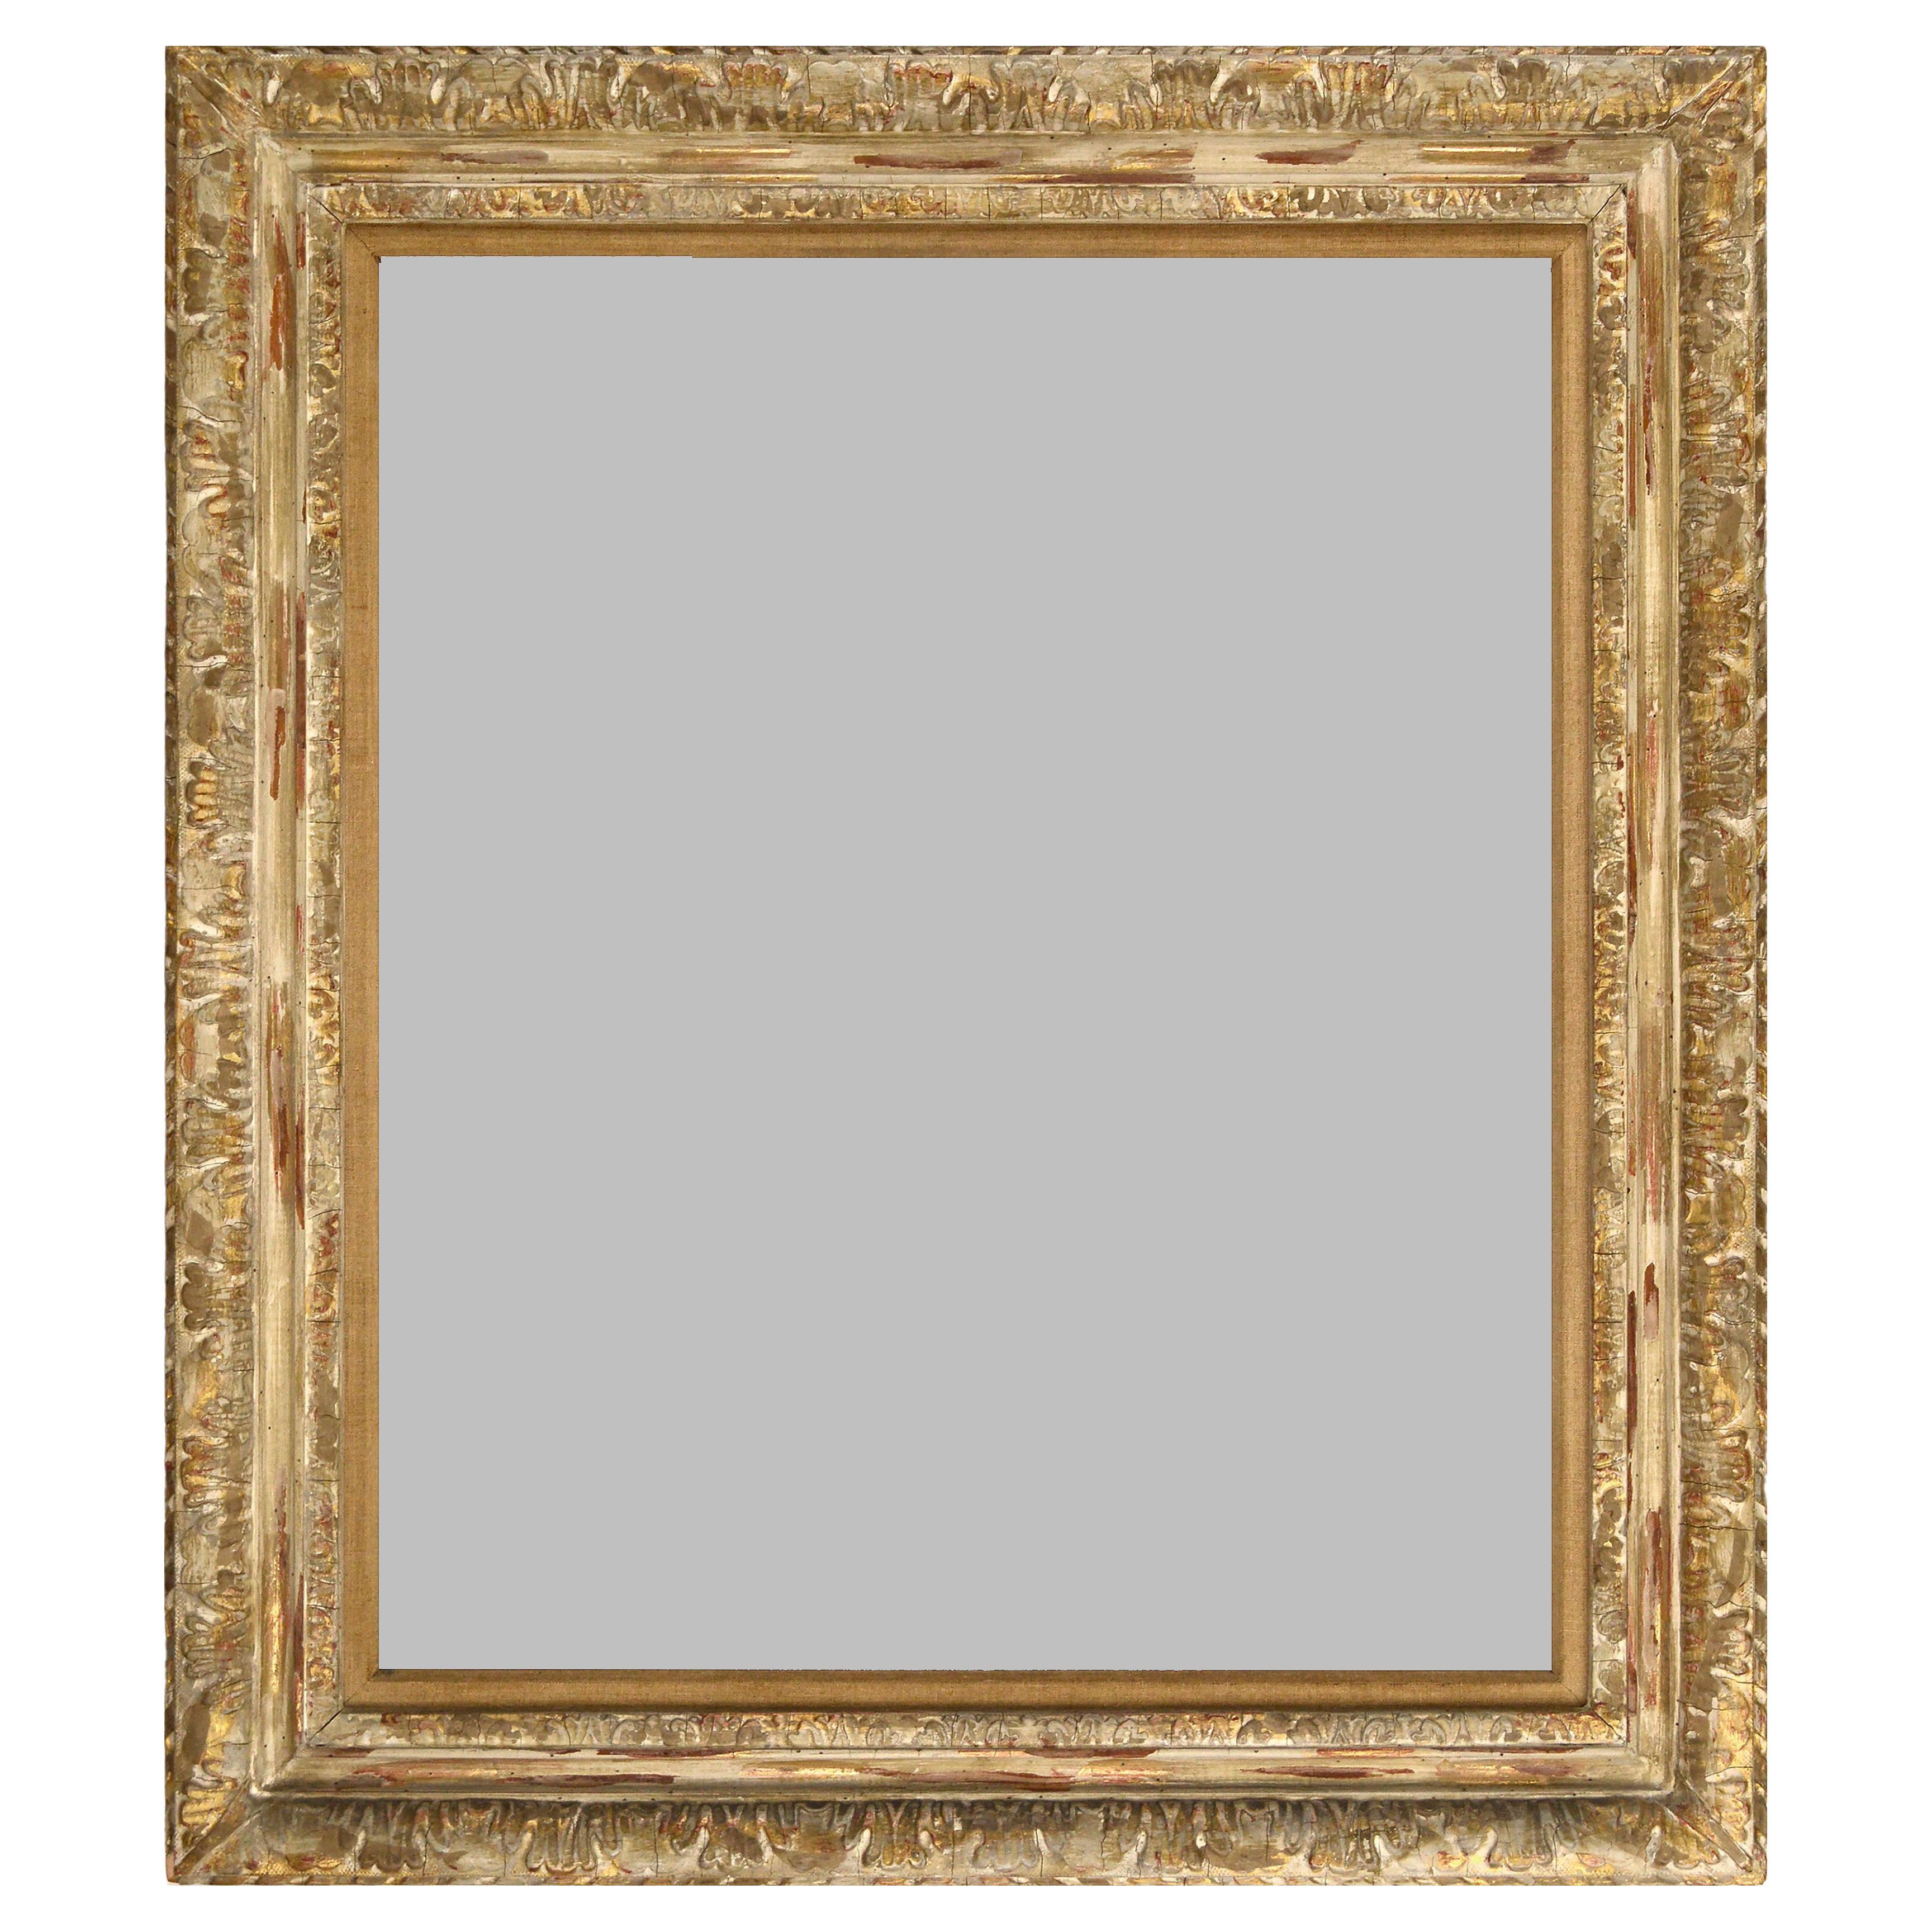 Fine and elegant antique Newcomb-Macklin carved giltwood frame. This period Arts & Crafts frame, from the renowned New York framing company extolled for its exceptional design and craftsmanship, is carved with a beautiful and refined decorative